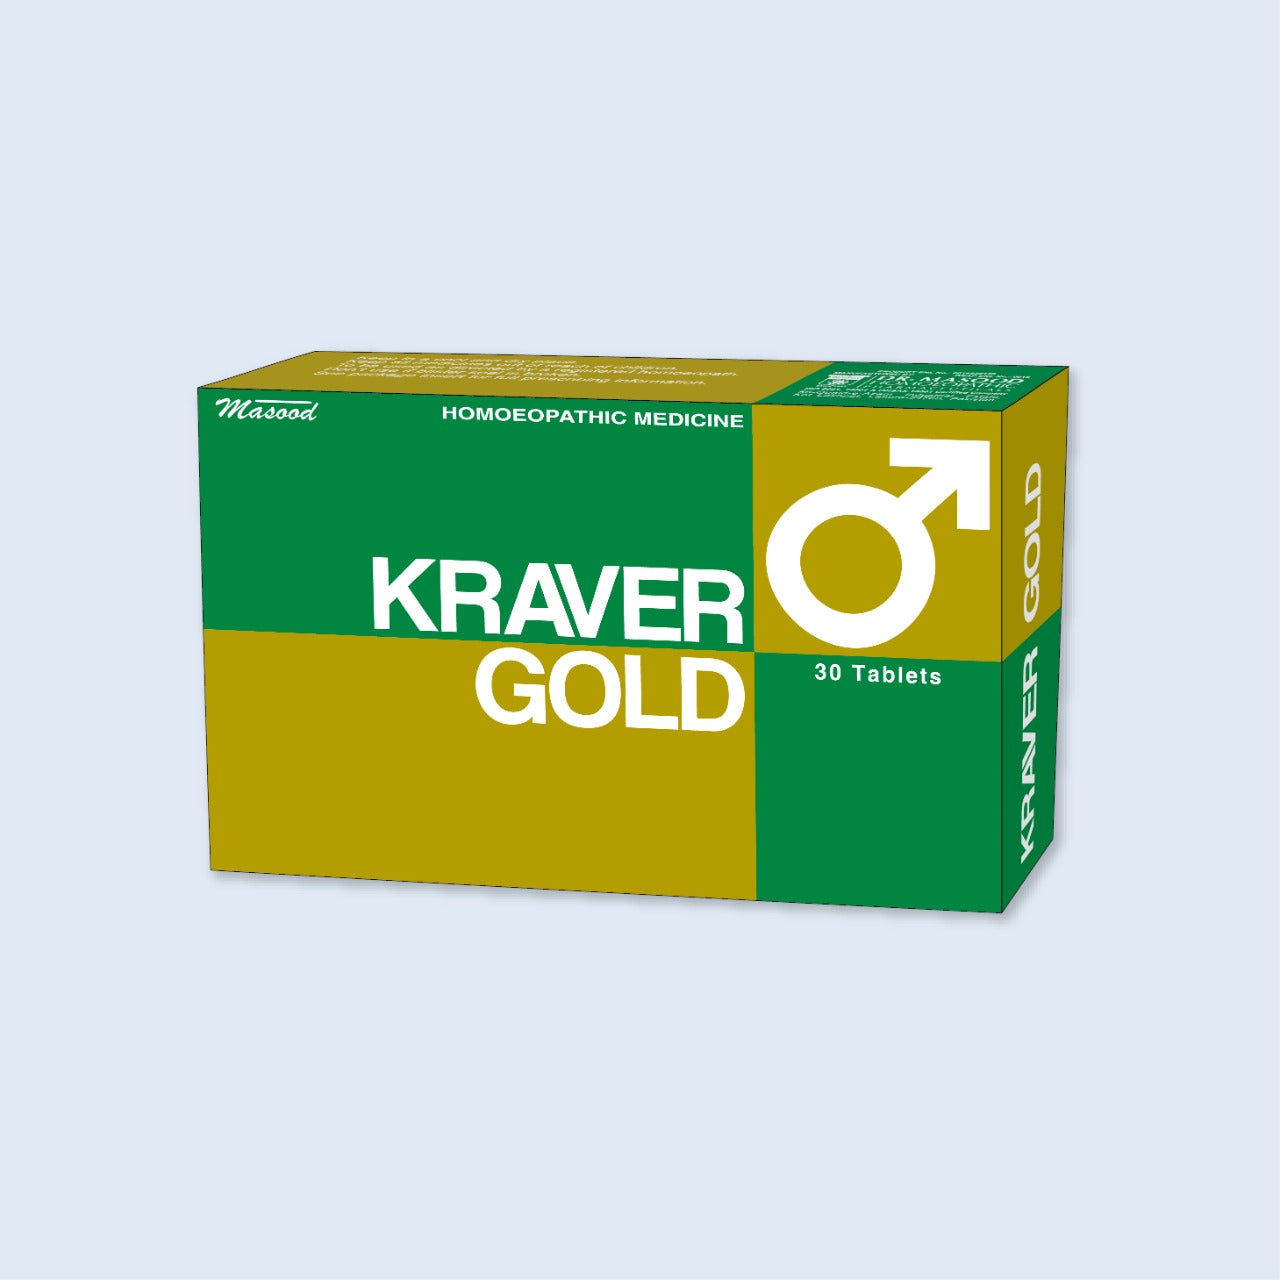 kraver-gold-tablets-homeoapthic-medicien-for-sexual-weakness-long-time